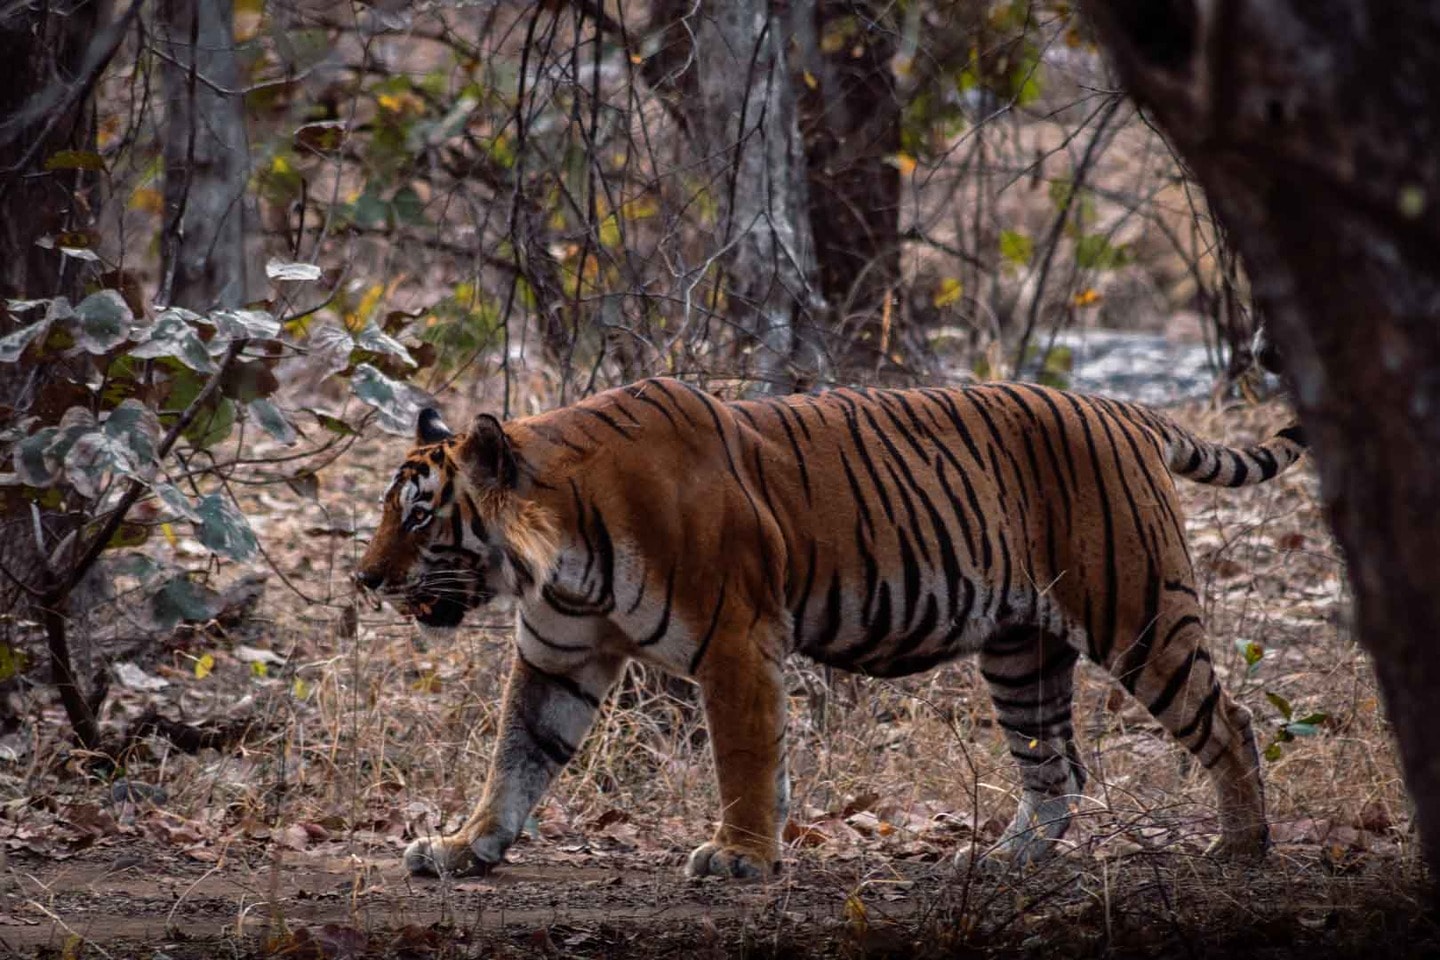 Tiger in Ranthambore National Park, India